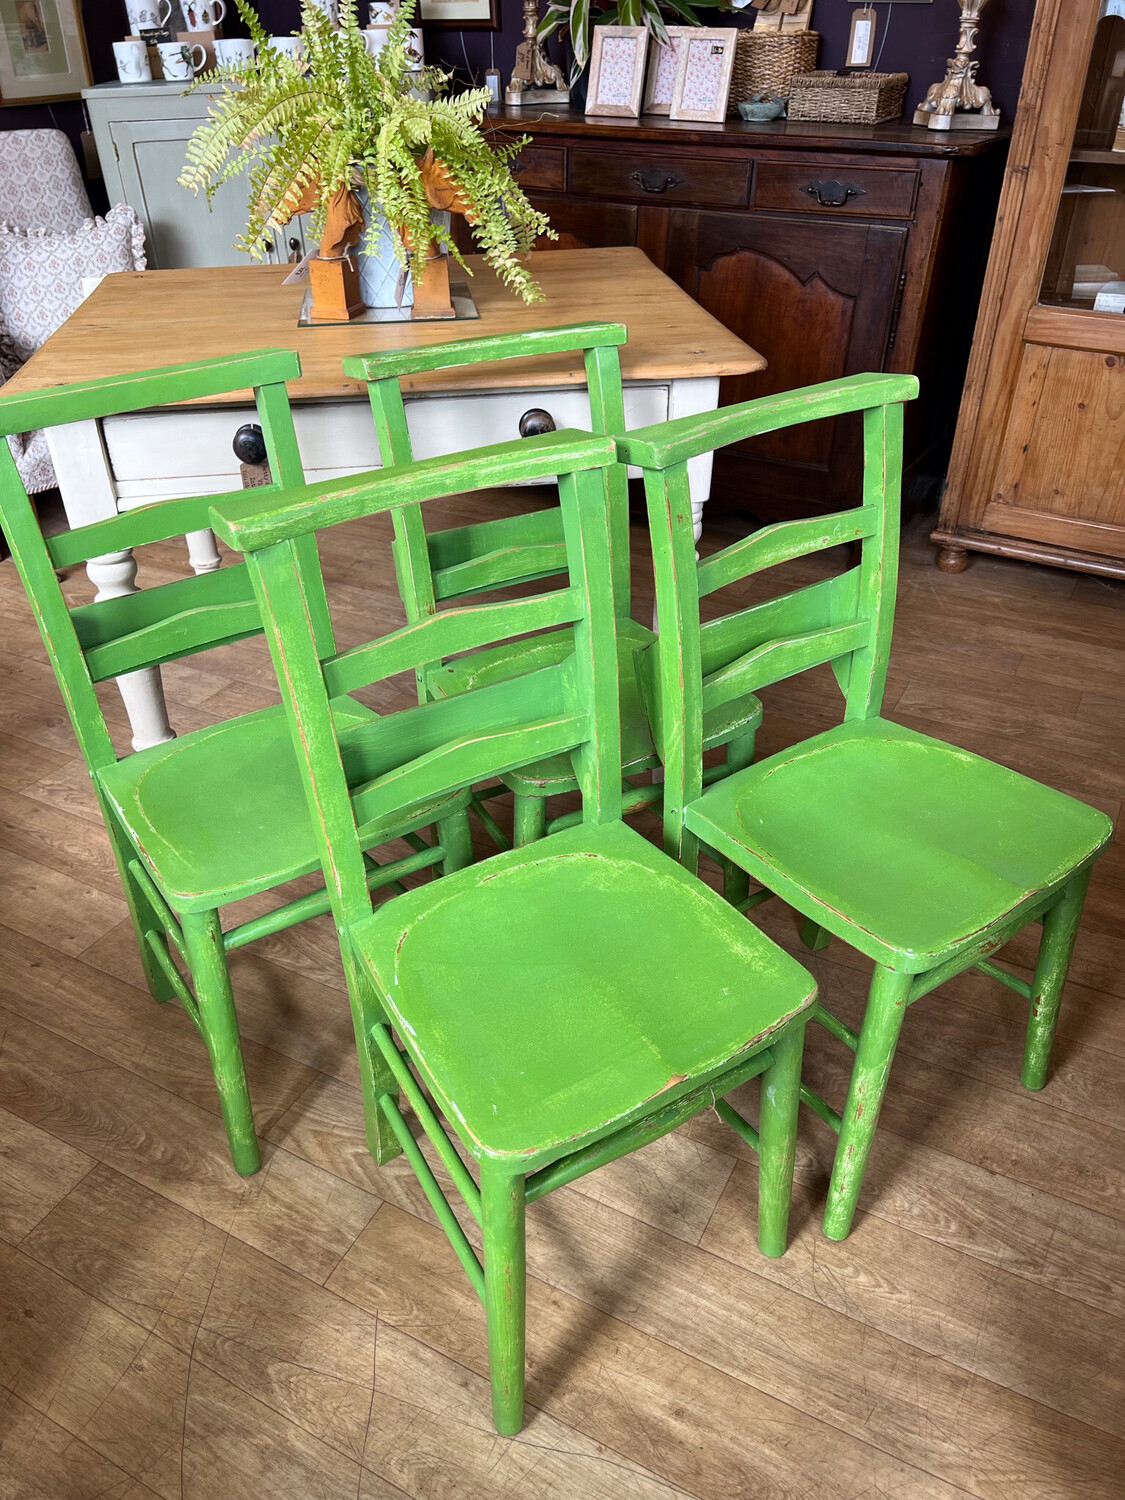 Vintage Chapel / Church / Dining Chairs - Painted Set Of Four